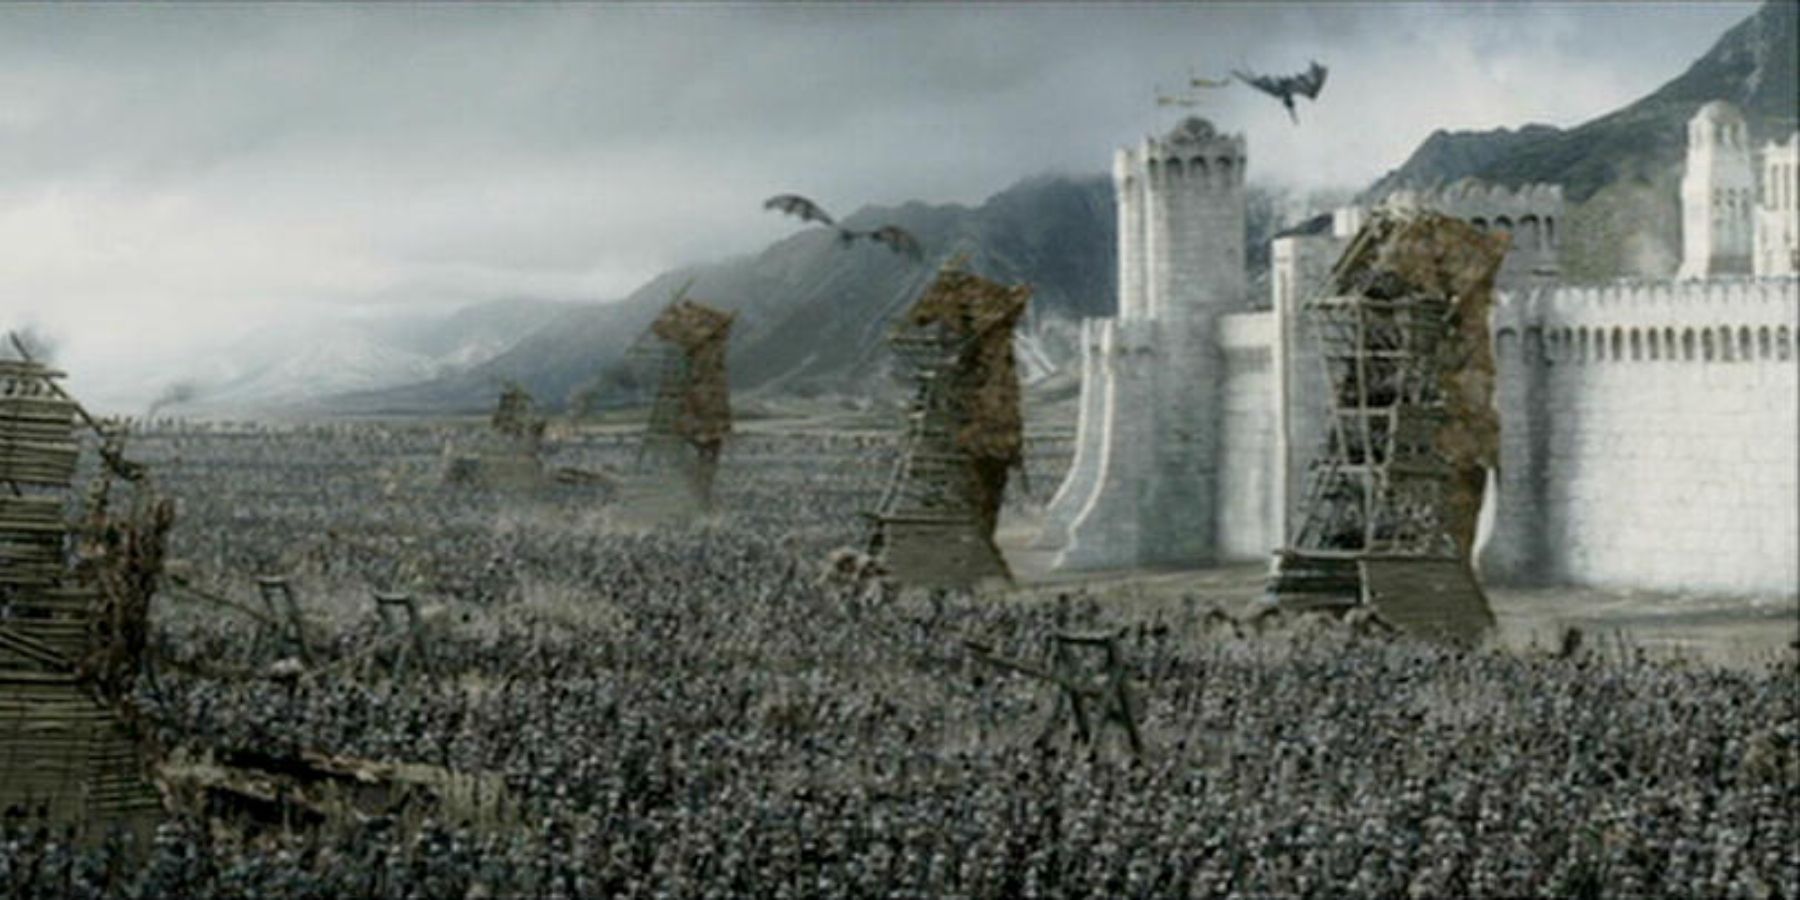 minas tirith lord of the rings